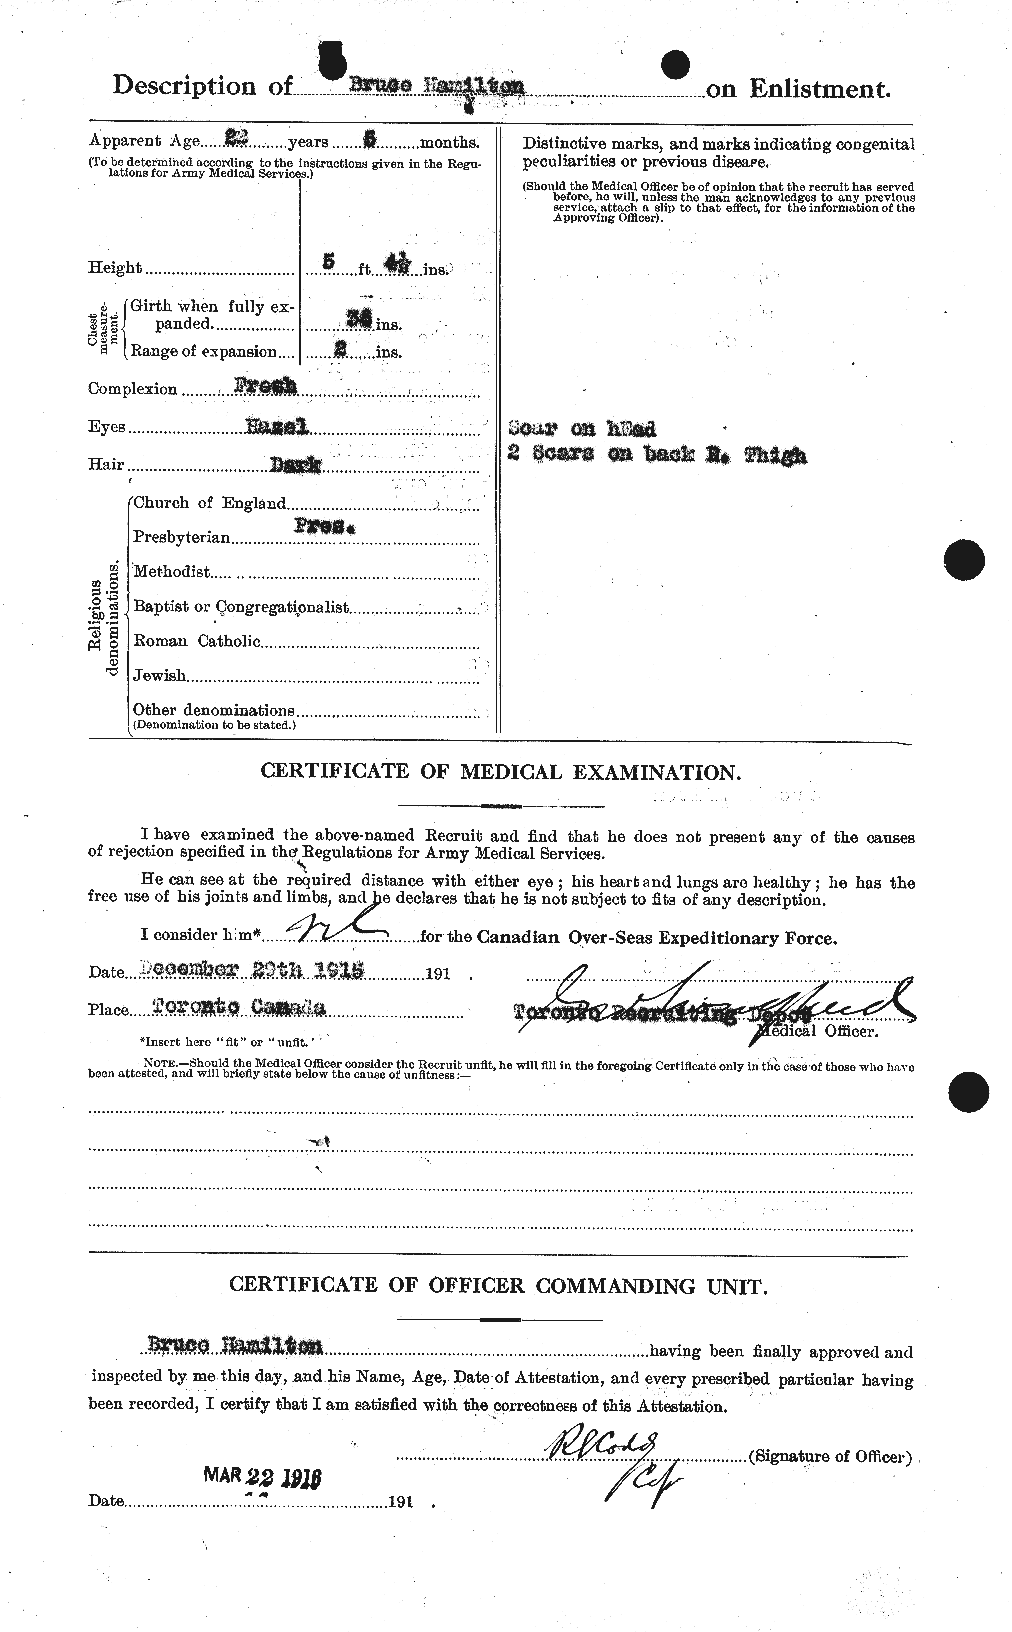 Personnel Records of the First World War - CEF 375277b